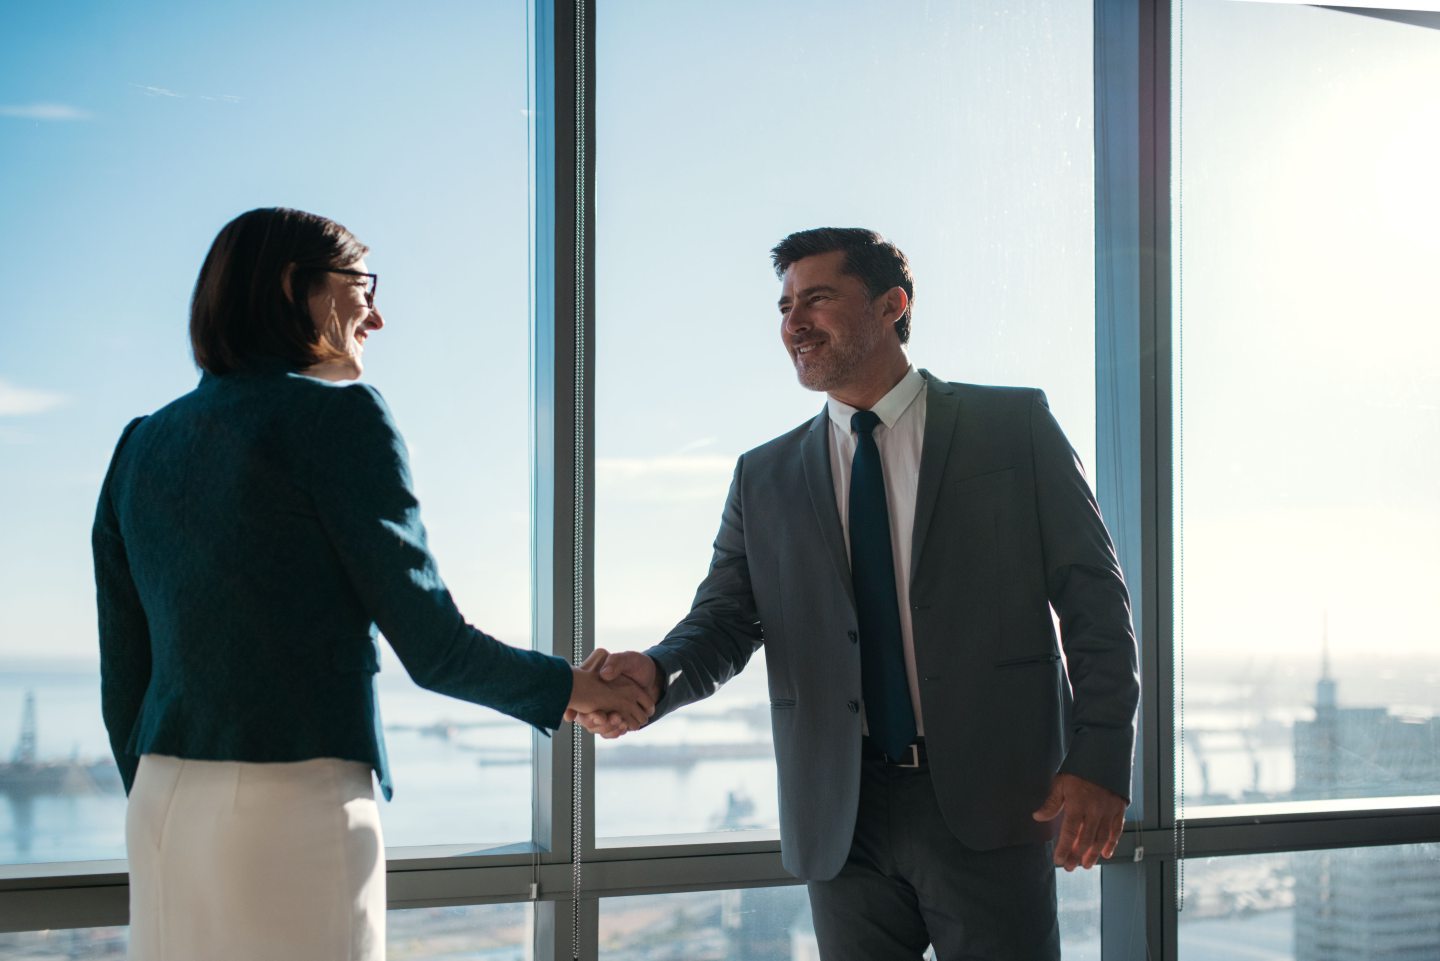 Business woman and business man shaking hands.